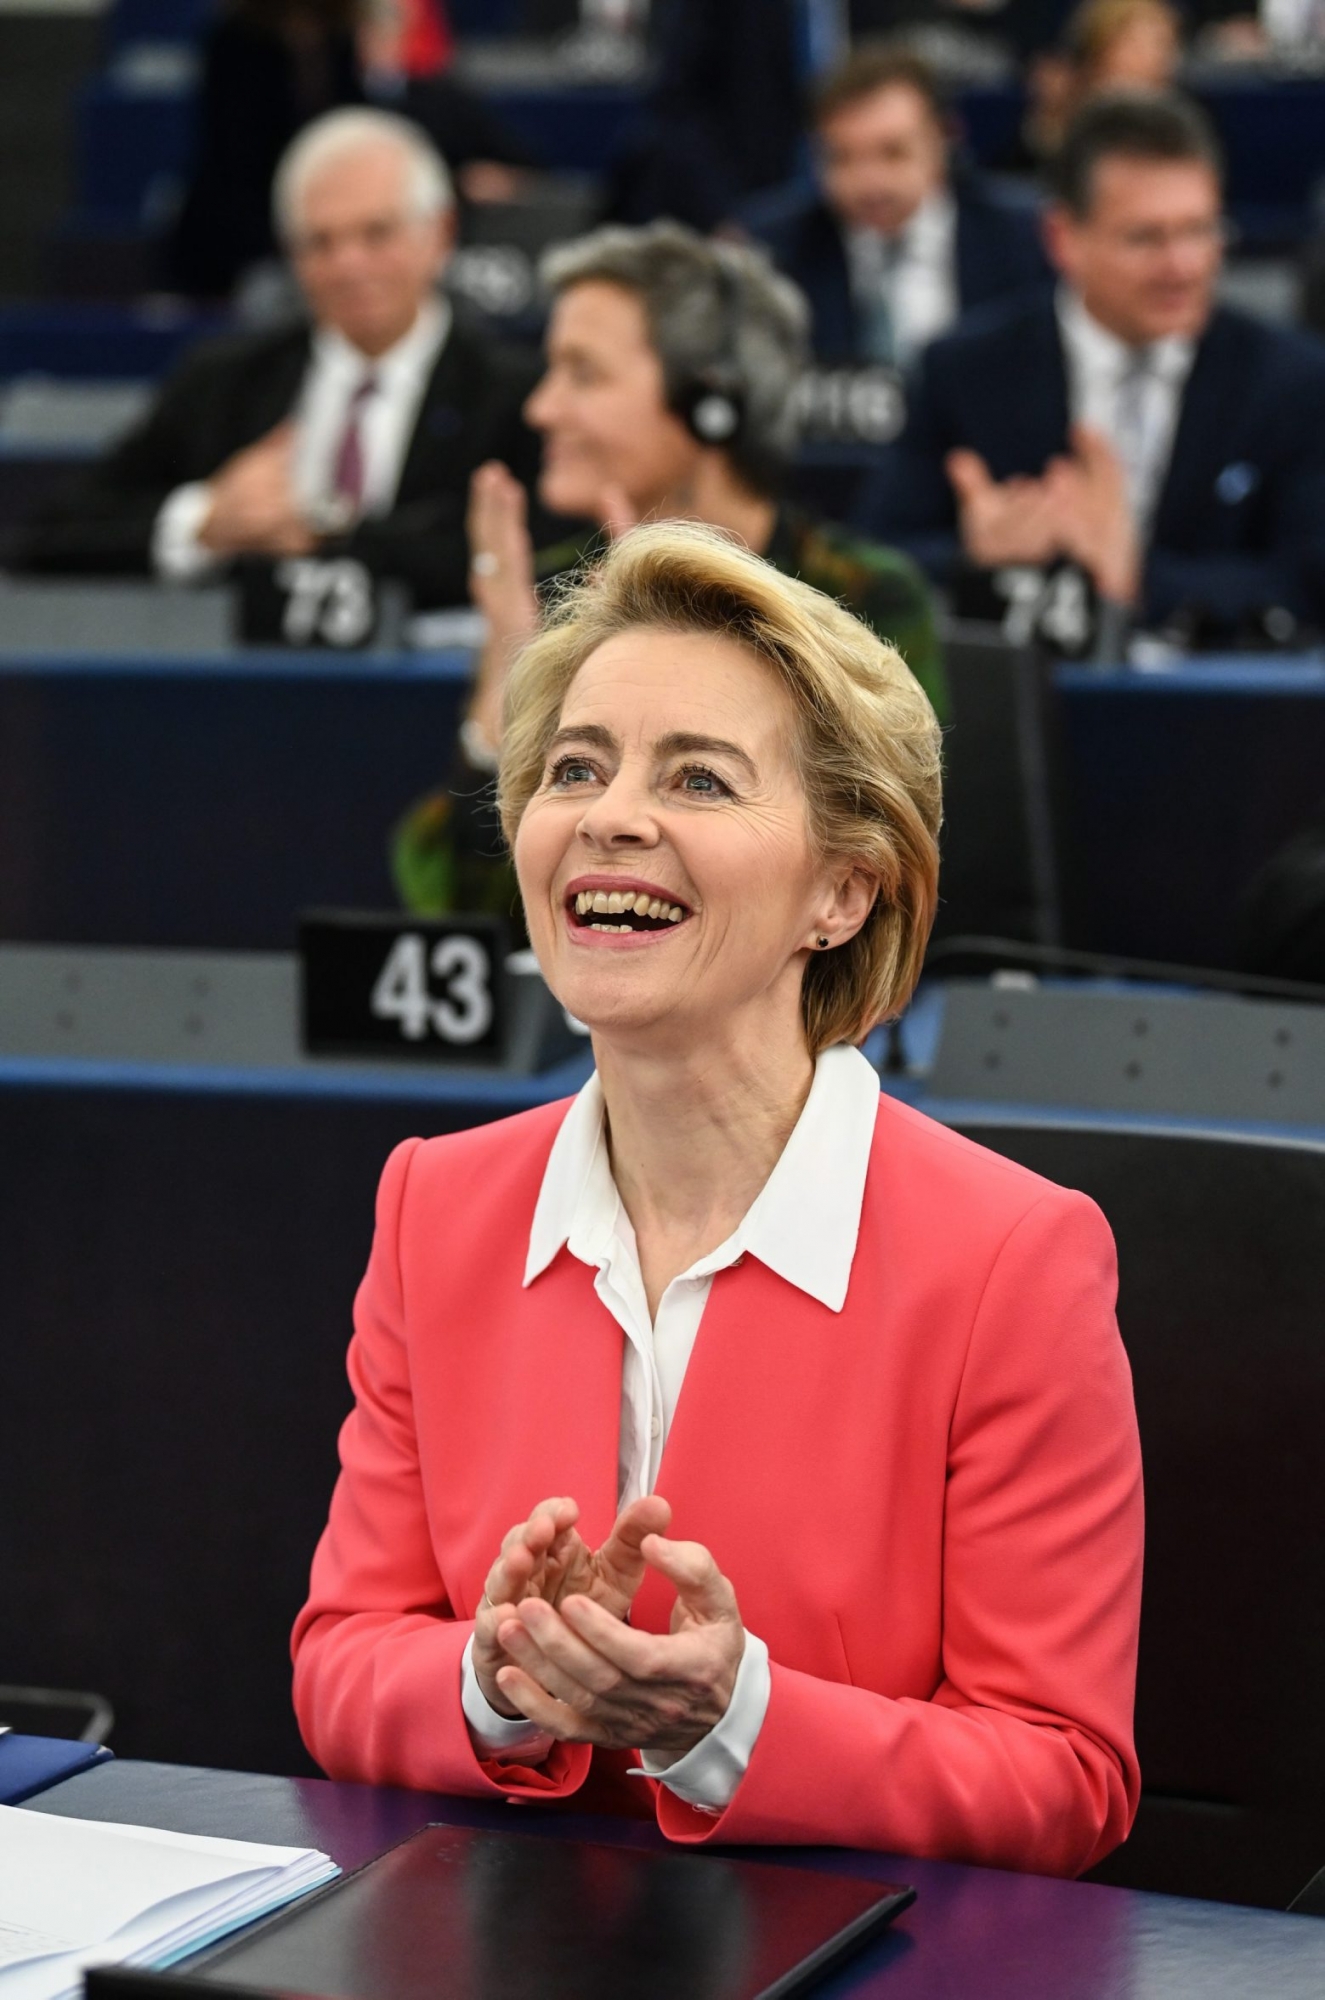 epa08028762 European Commission President Ursula von der Leyen reacts before the vote of Members of the European Parliament on her college of commissioners at the European Parliament in Strasbourg, France, 27 November 2019.  EPA/PATRICK SEEGER EUROPEAN PARLIAMENT FRANCE STRASBOURG